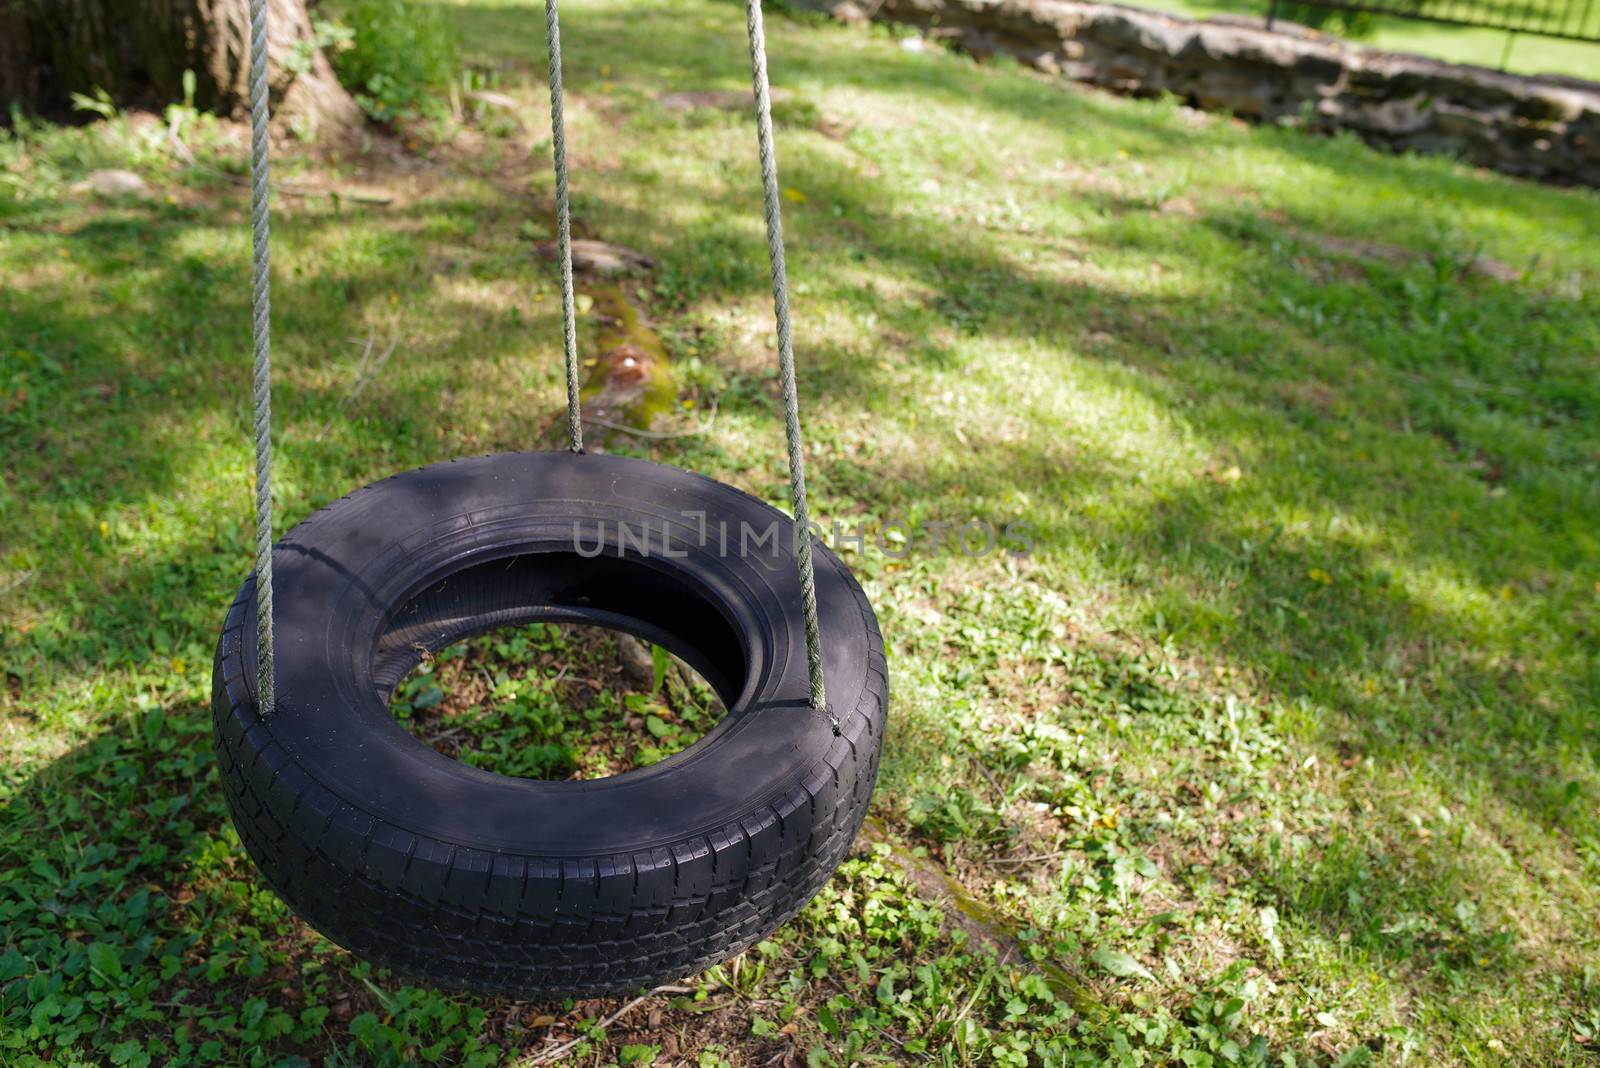 Close up of quiet tire swing in a grassy yard by marysalen